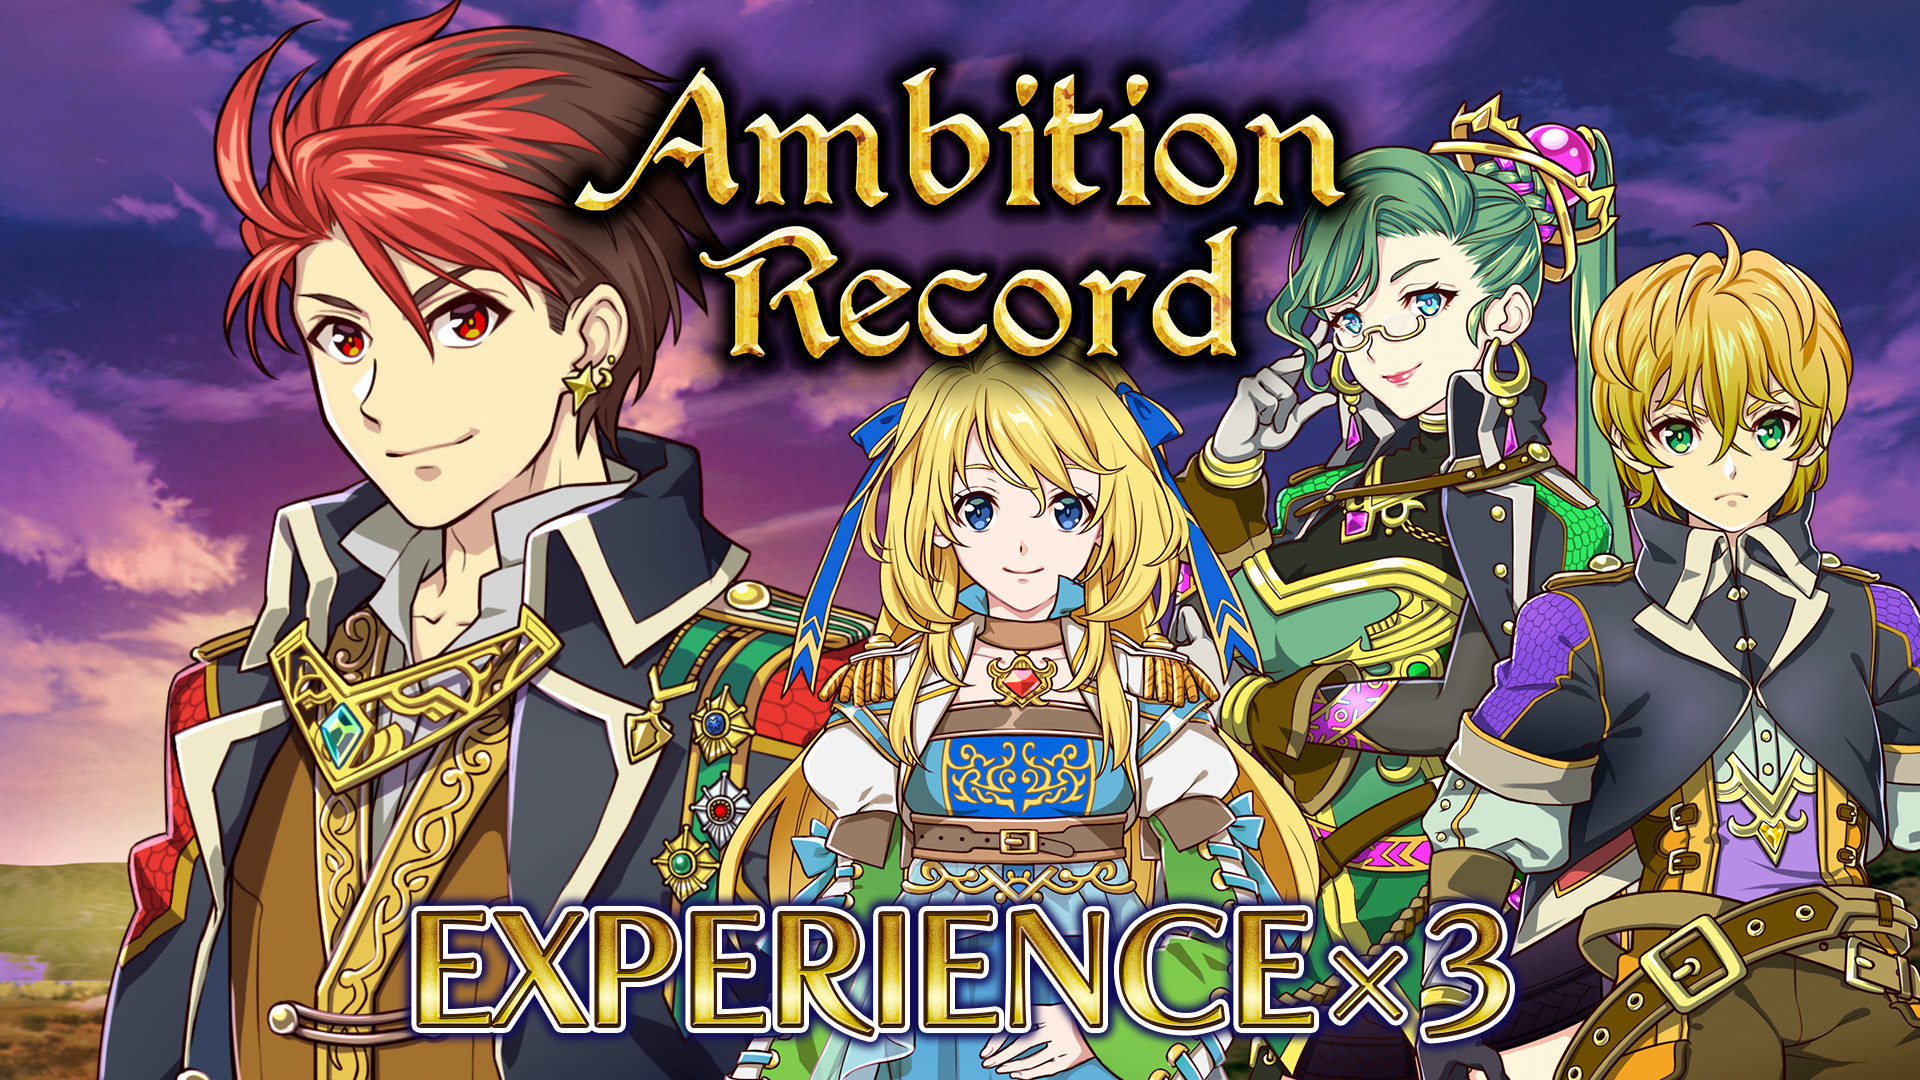 Experience x3 - Ambition Record Featured Screenshot #1